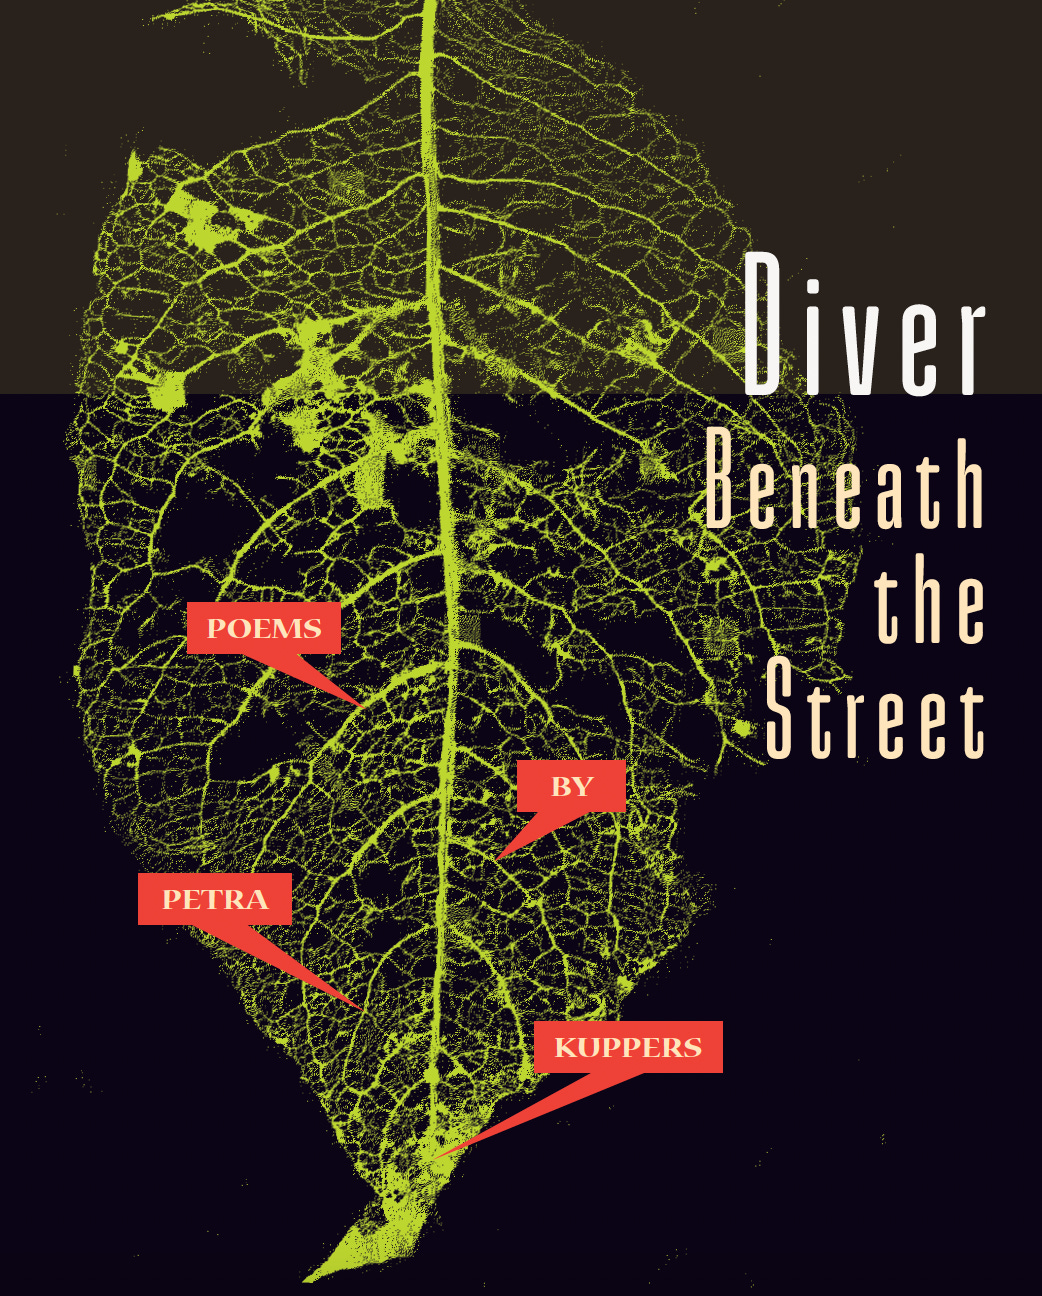 Book Cover Image description: a neon-green skeleton leaf’s botanical lace lances downward into earth. Beneath the word Diver, a horizon melts brown into black. Red labels speak of maps and crime scenes.